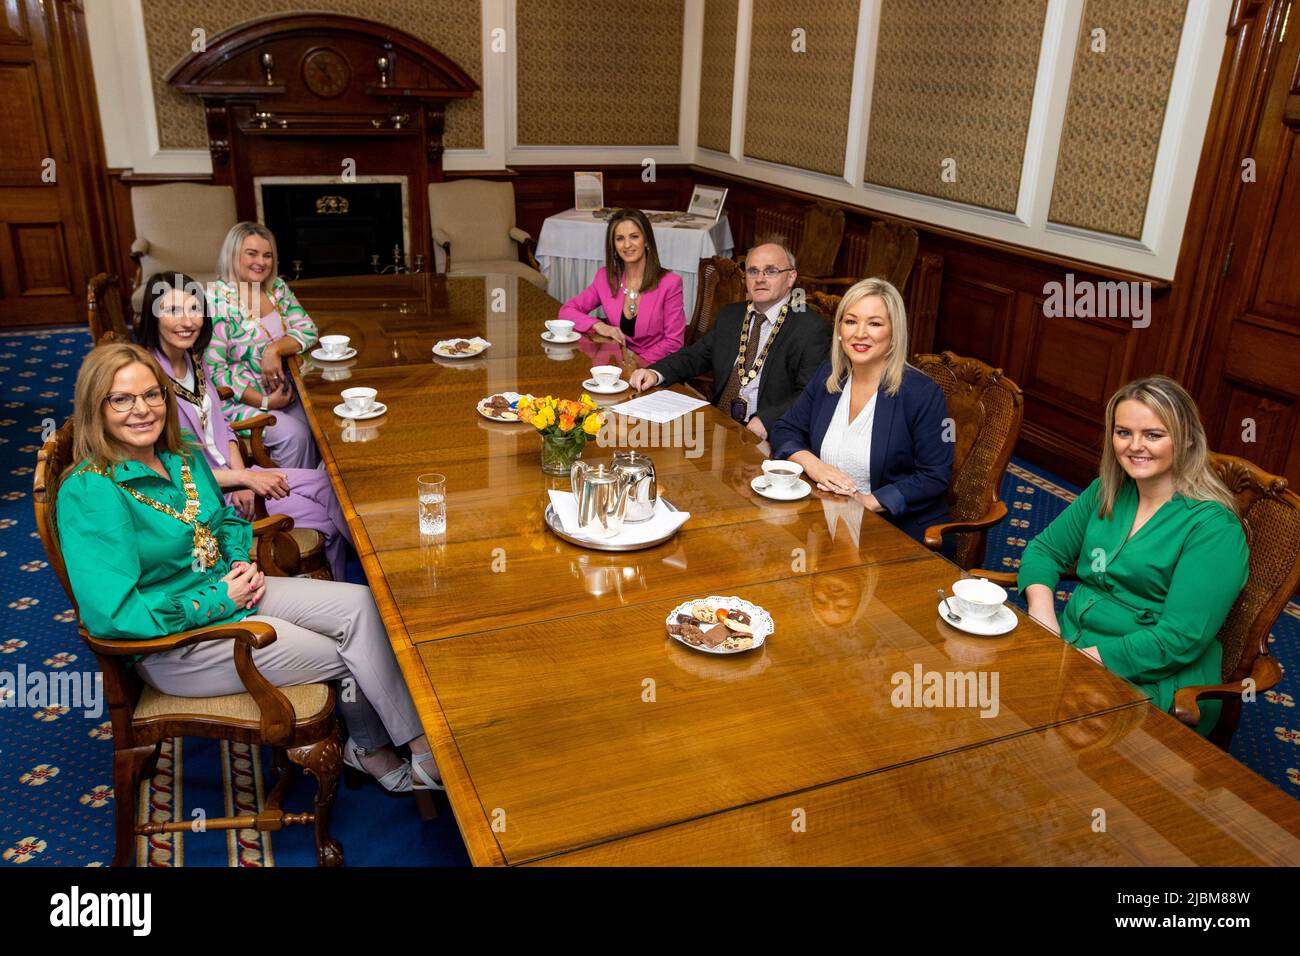 (Left-right) Lord Mayor of Belfast Sinn Fein Councillor Christina Black, Chair of Mid Ulster District Council Sinn Fein Councillor Cora Groogan, Mayor of Derry City and Strabane District Council, Sinn Fein Councillor Sandra Duffy, Vice-Chair of Newry, Mourne and Down District Council Sinn Fein Councillor Aoife Finnegan, Chairperson of Fermanagh & Omagh District Council Sinn Fein Councillor Barry McElduff, Sinn Fein Vice President Michelle O'Neill MLA, Vice-Chair of Causeway Coast and Glens Borough Council Sinn Fein Councillor Kathleen McGurk during an invitation to the Lord Mayor's Parlour at  Stock Photo